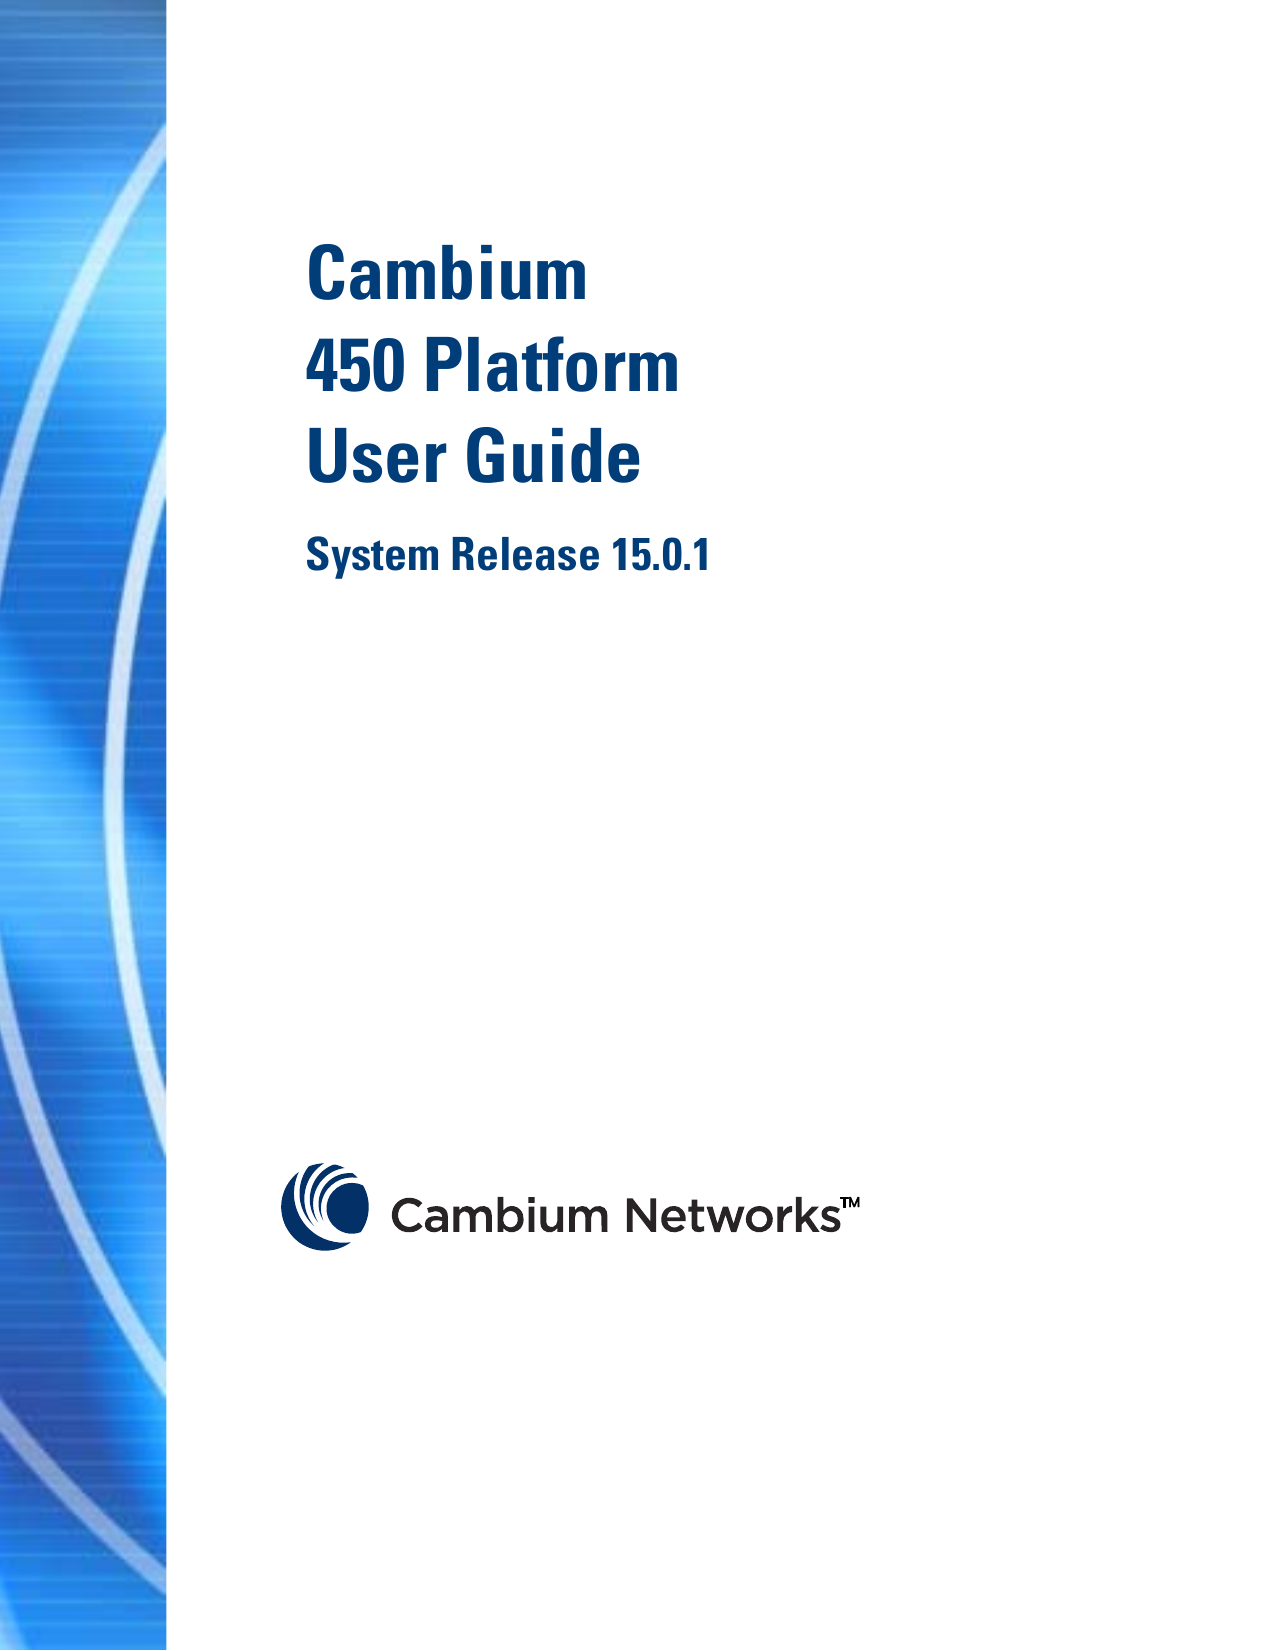  33F  Cambium  450 Platform  User Guide System Release 15.0.1                  pass  